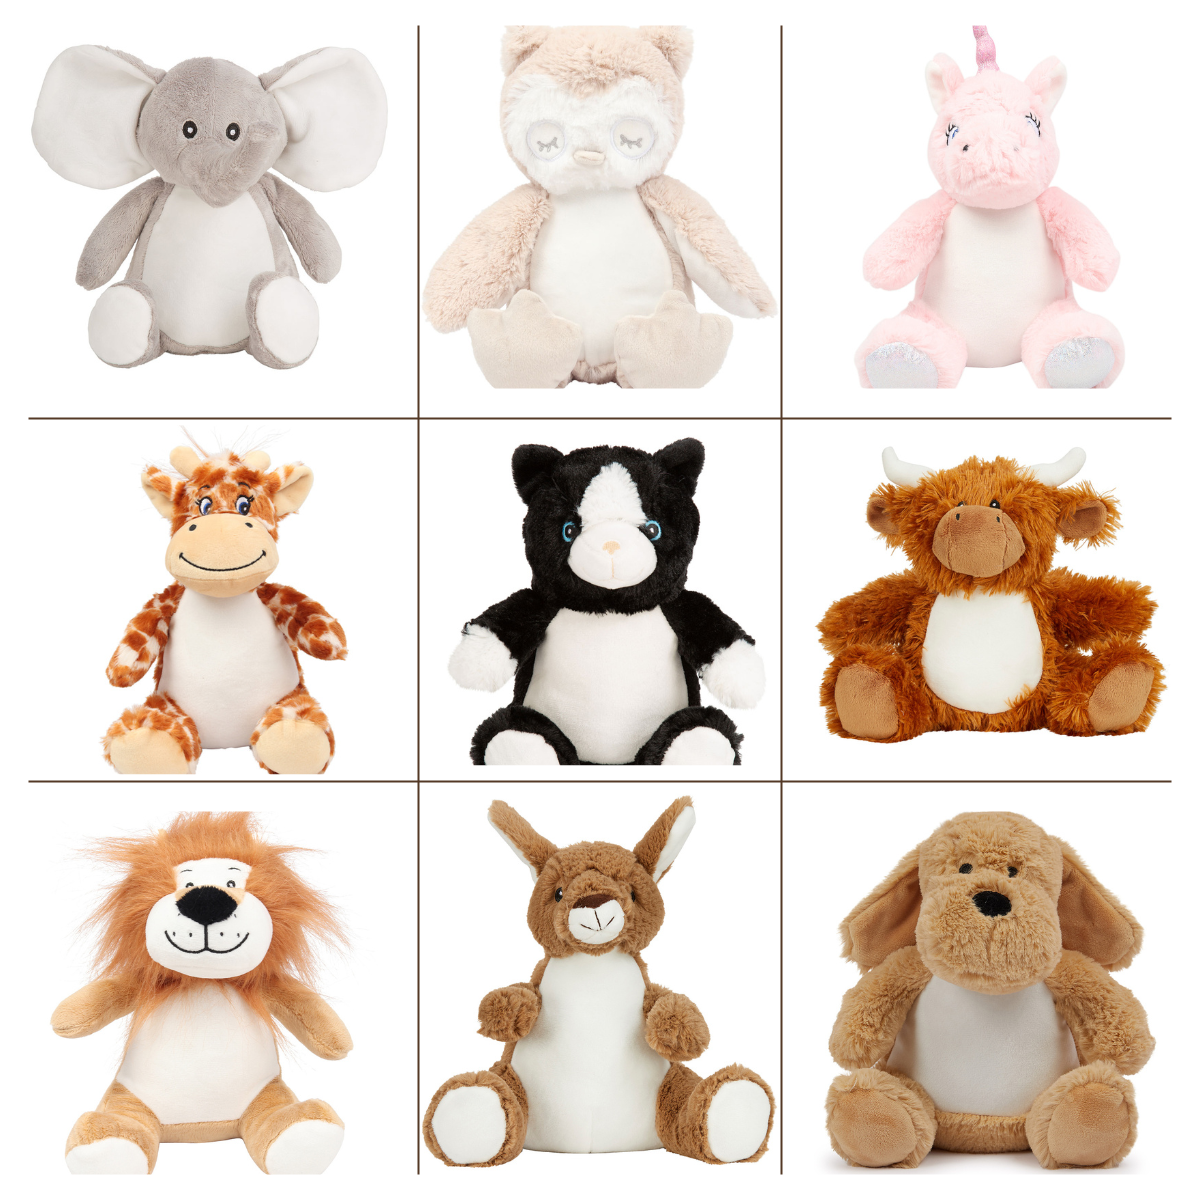 Personalised Big Sister/Brother - Little Sister/Brother Plush Teddy Set